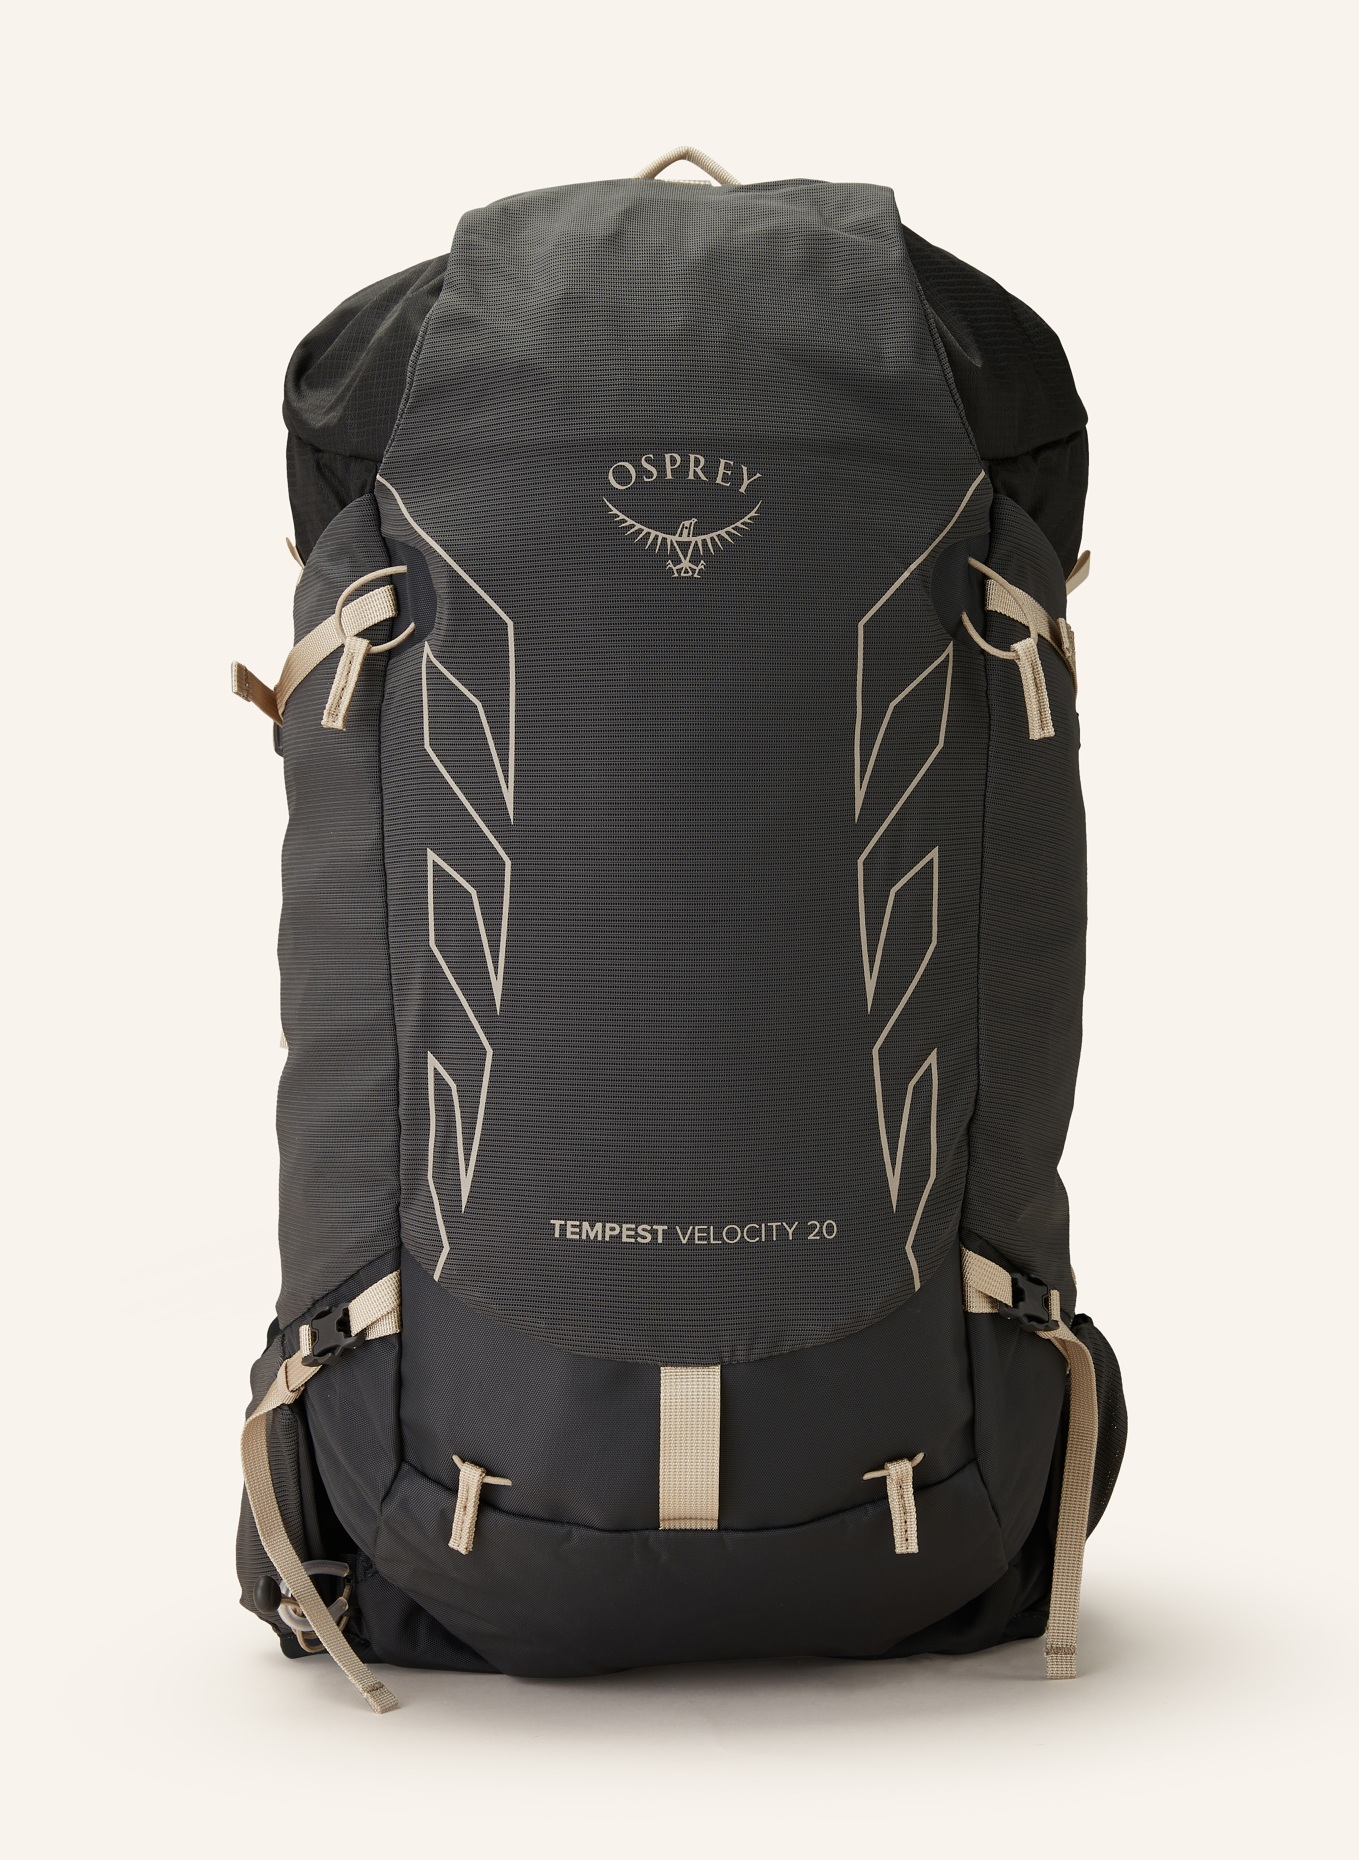 OSPREY Backpack TEMPEST VELOCITY 20 l, Color: GRAY (Image 1)